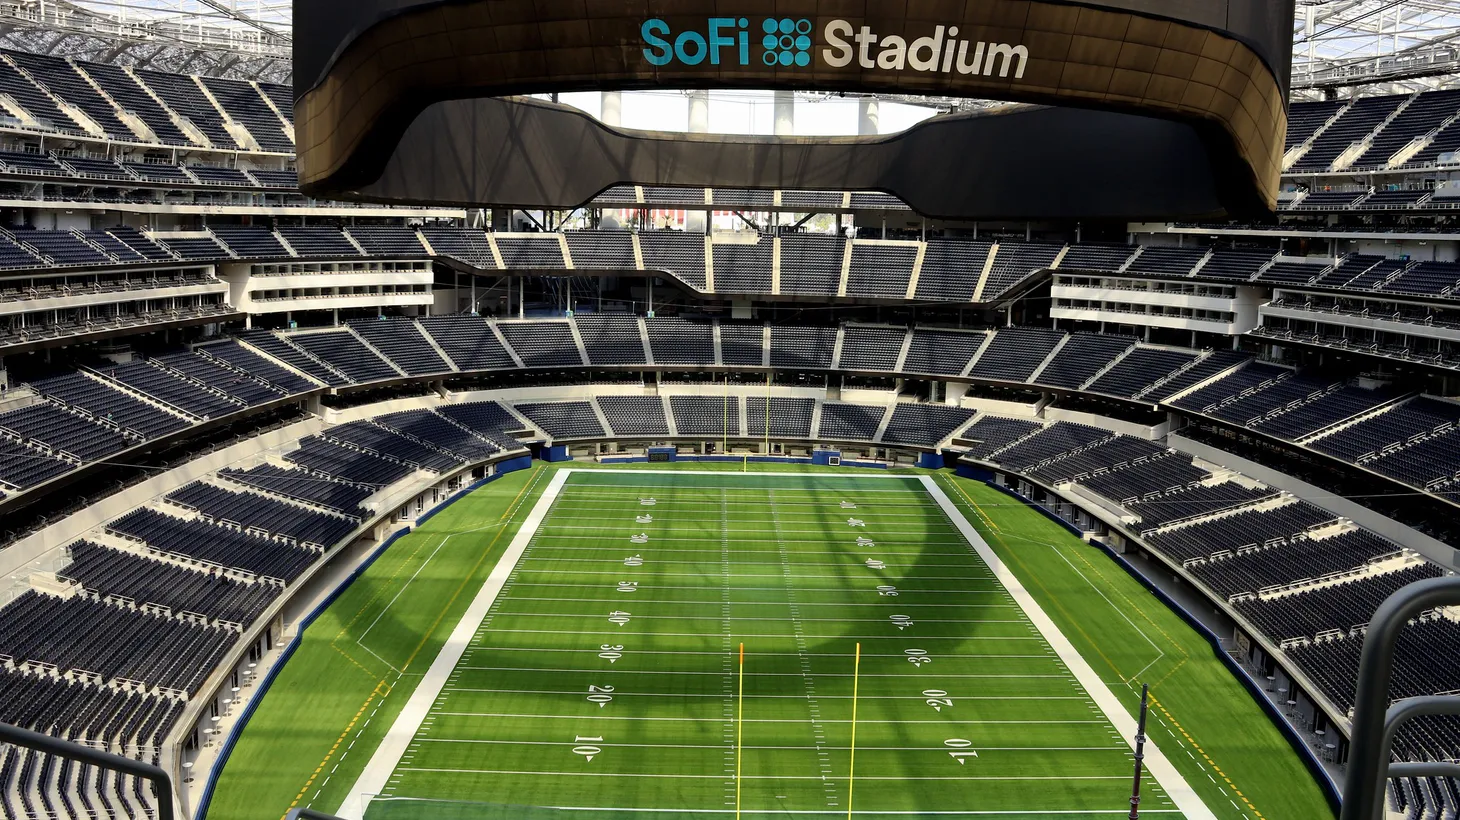 SoFi Stadium is getting ready for its national close-up. The Inglewood venue will host the LA Rams and the San Francisco 49ers this Sunday in pro football's NFC Championship. And two weeks later, it will be entertainment central as the setting for the biggest event in U.S. sports: the Super Bowl.